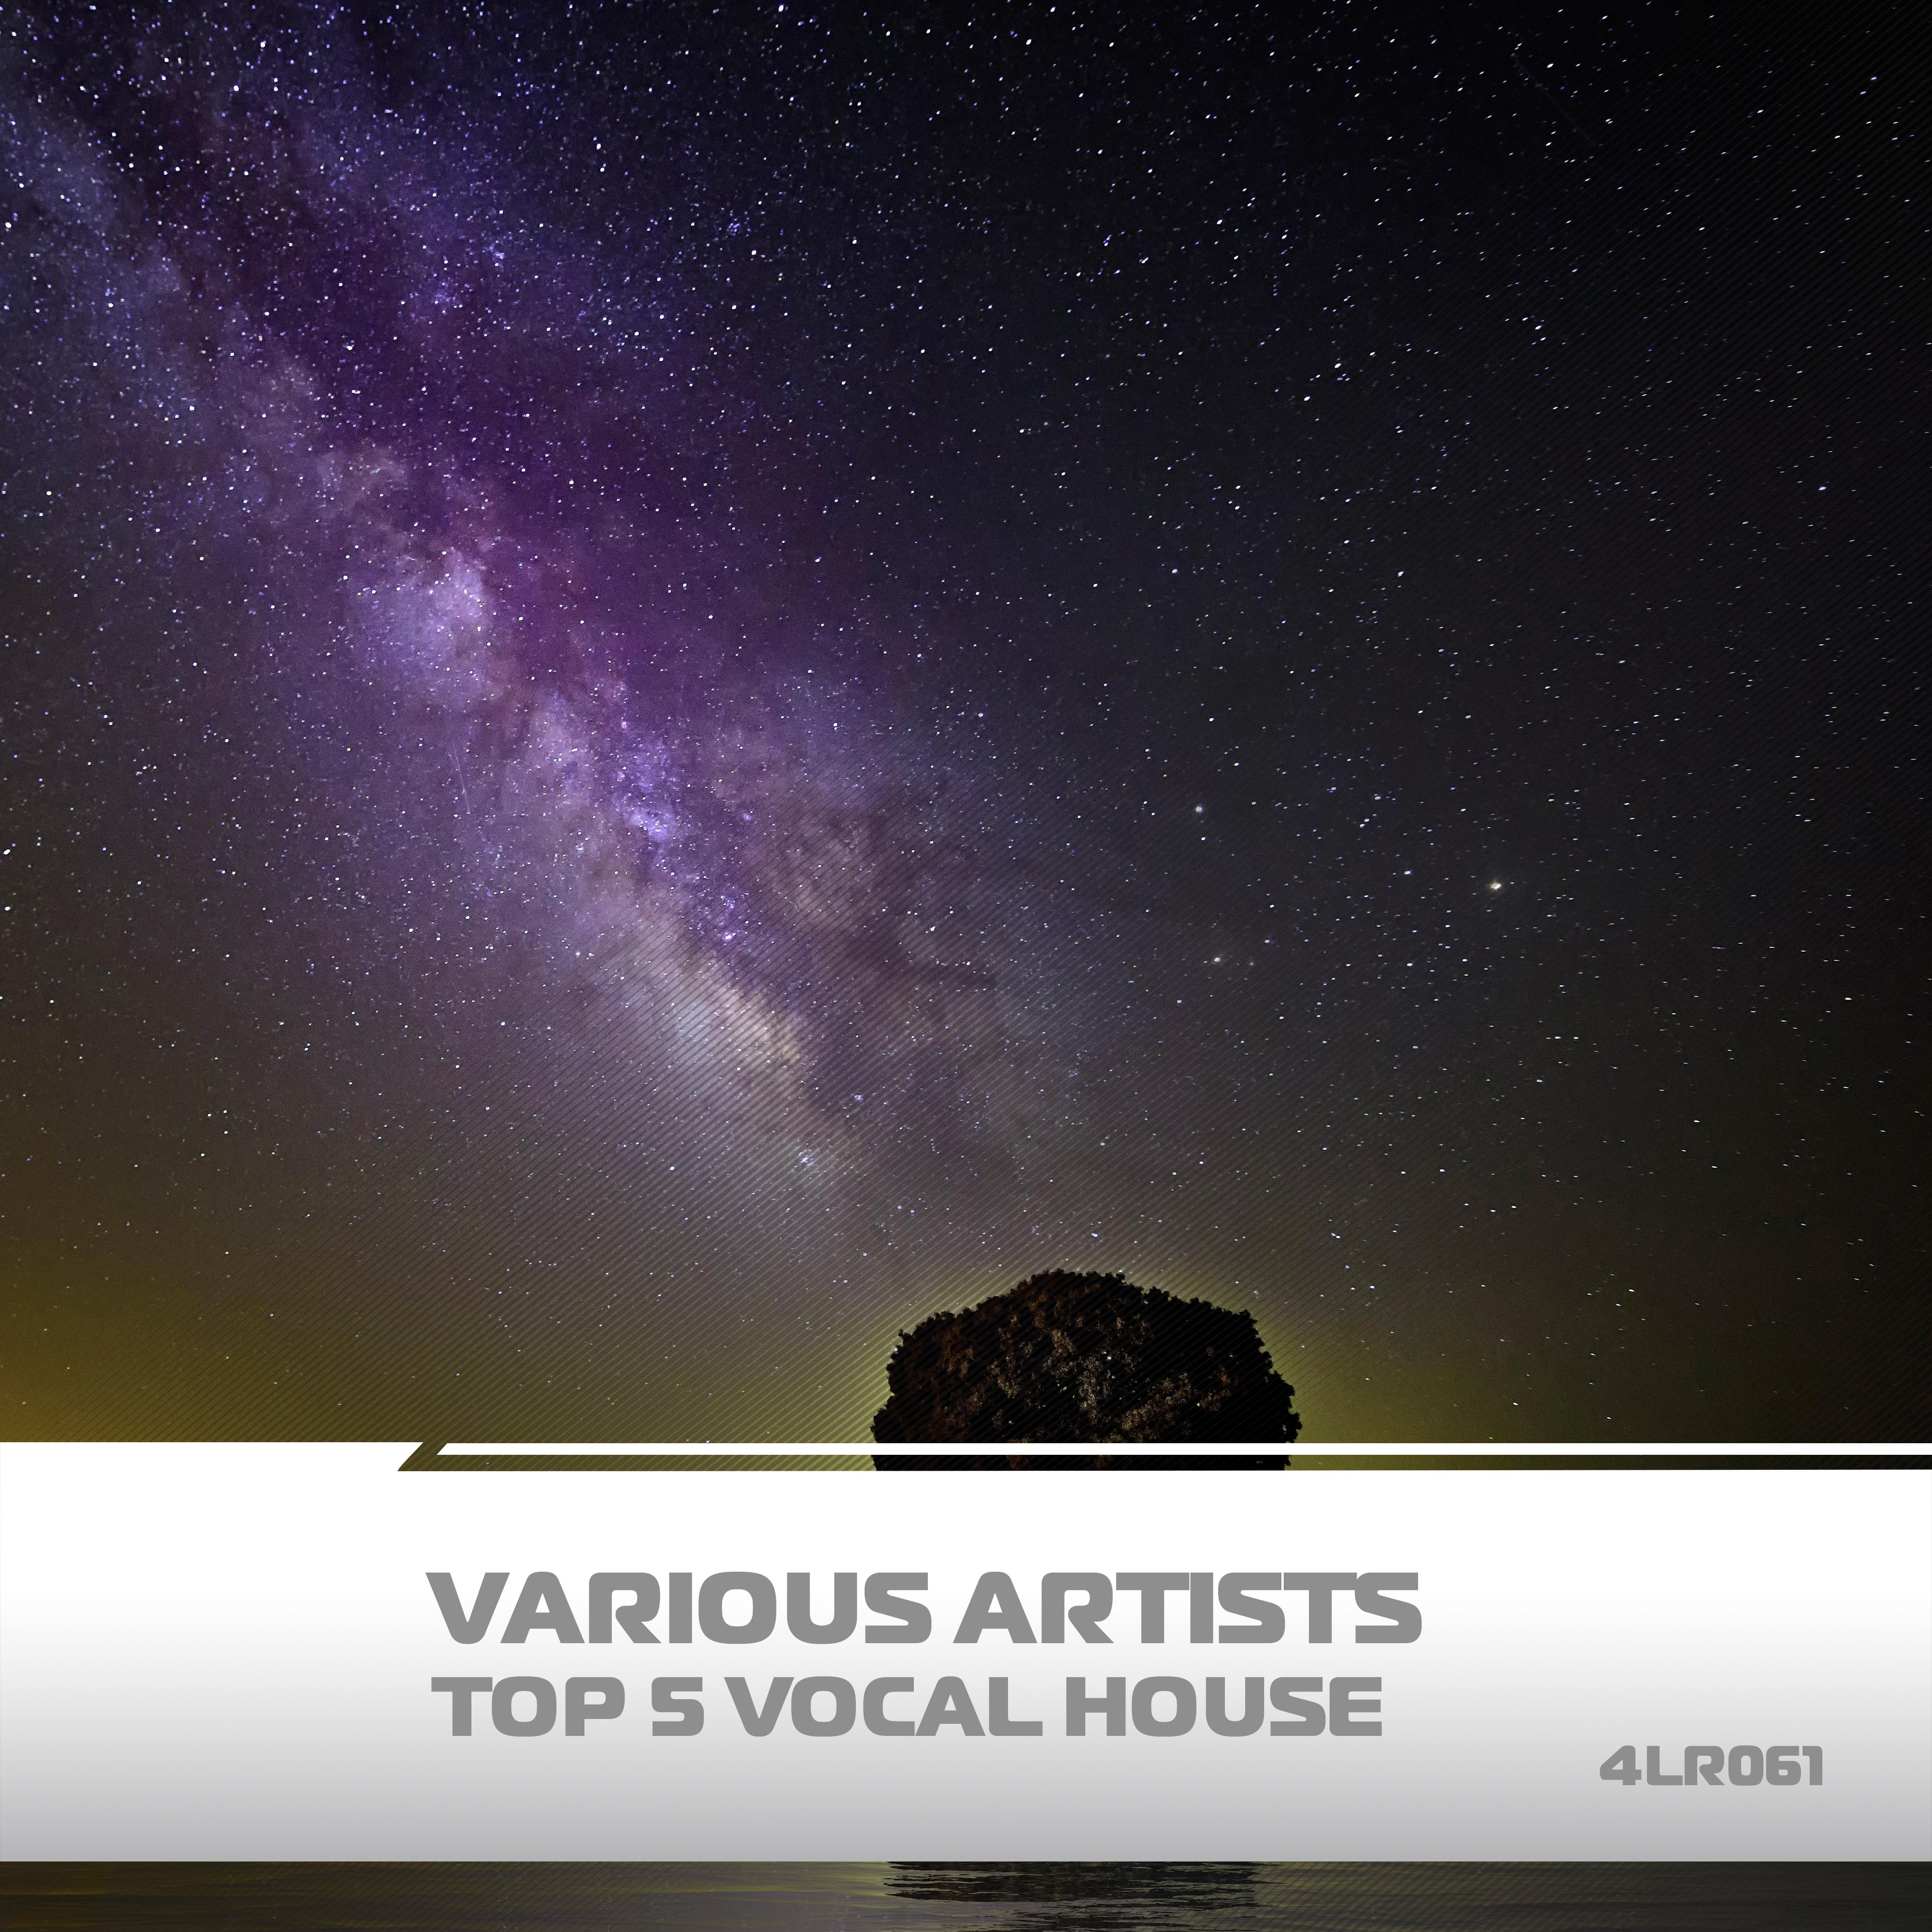 Top 5 Vocal House